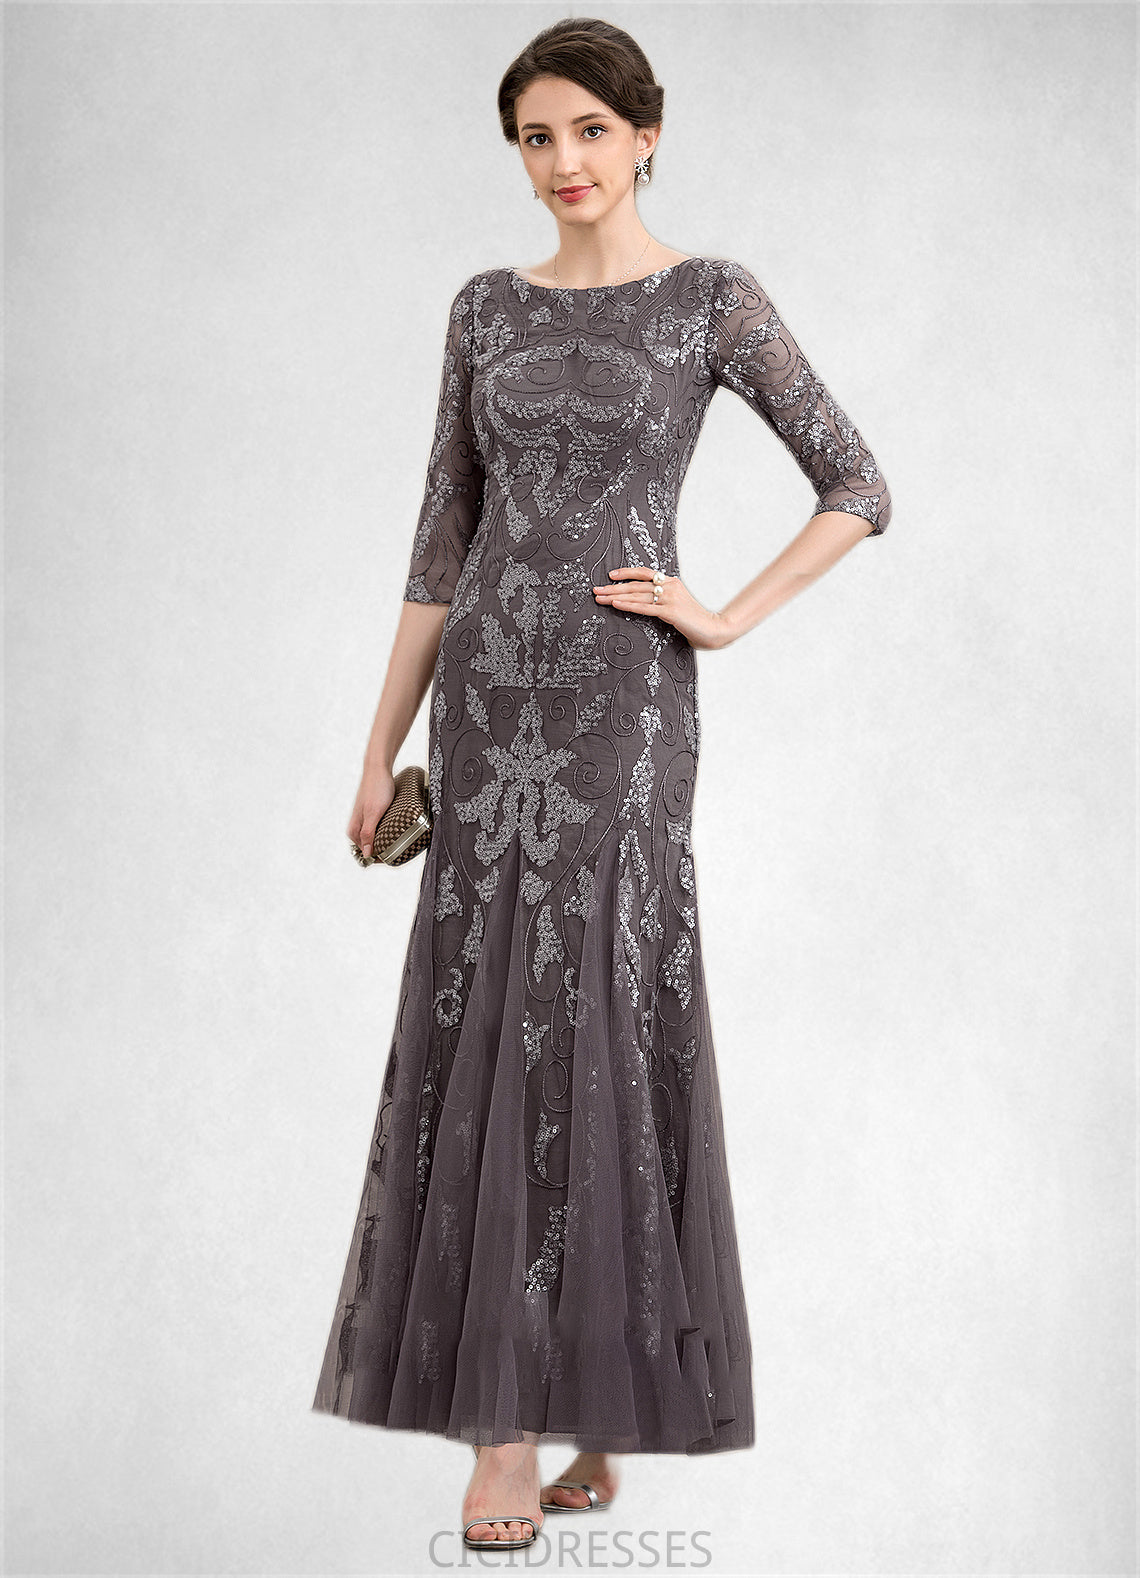 Carolyn Sheath/Column Scoop Neck Ankle-Length Tulle Sequined Mother of the Bride Dress CIC8126P0014758